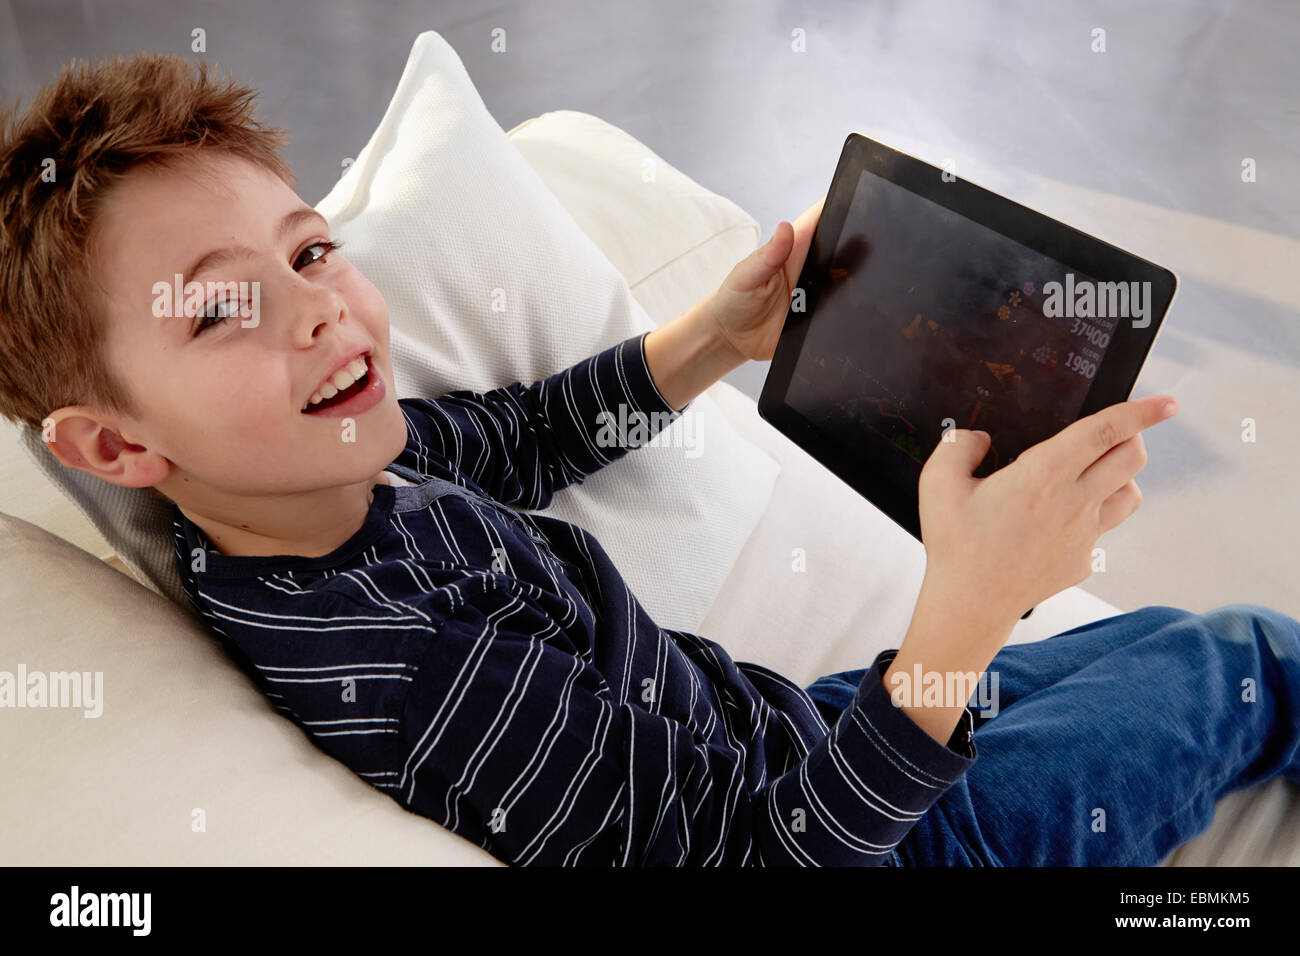 Boy sitting with tablet pc on a sofa, Germany Stock Photo